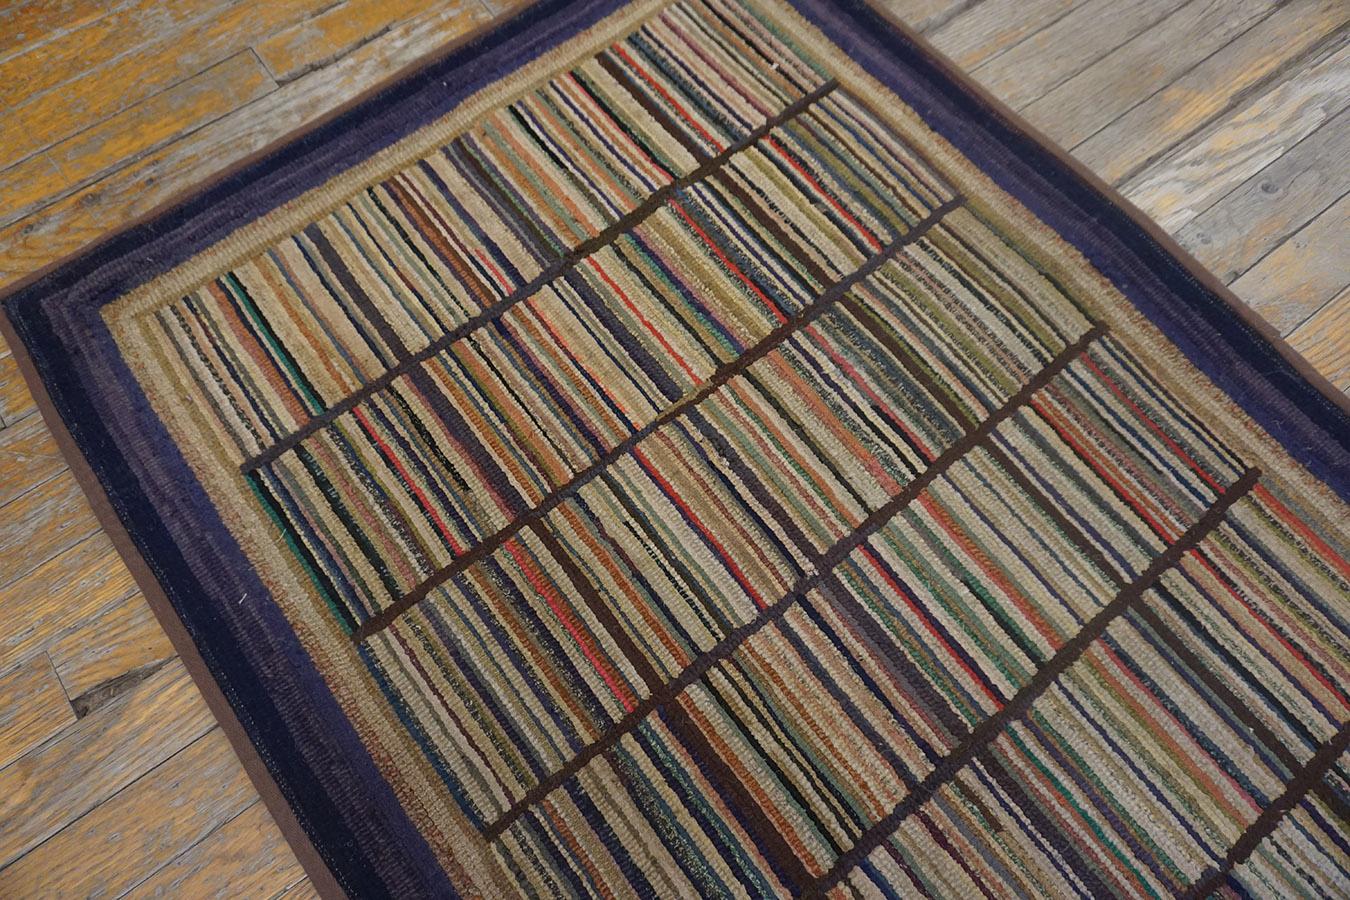 Early 20th Century American Hooked Rug ( 2'7